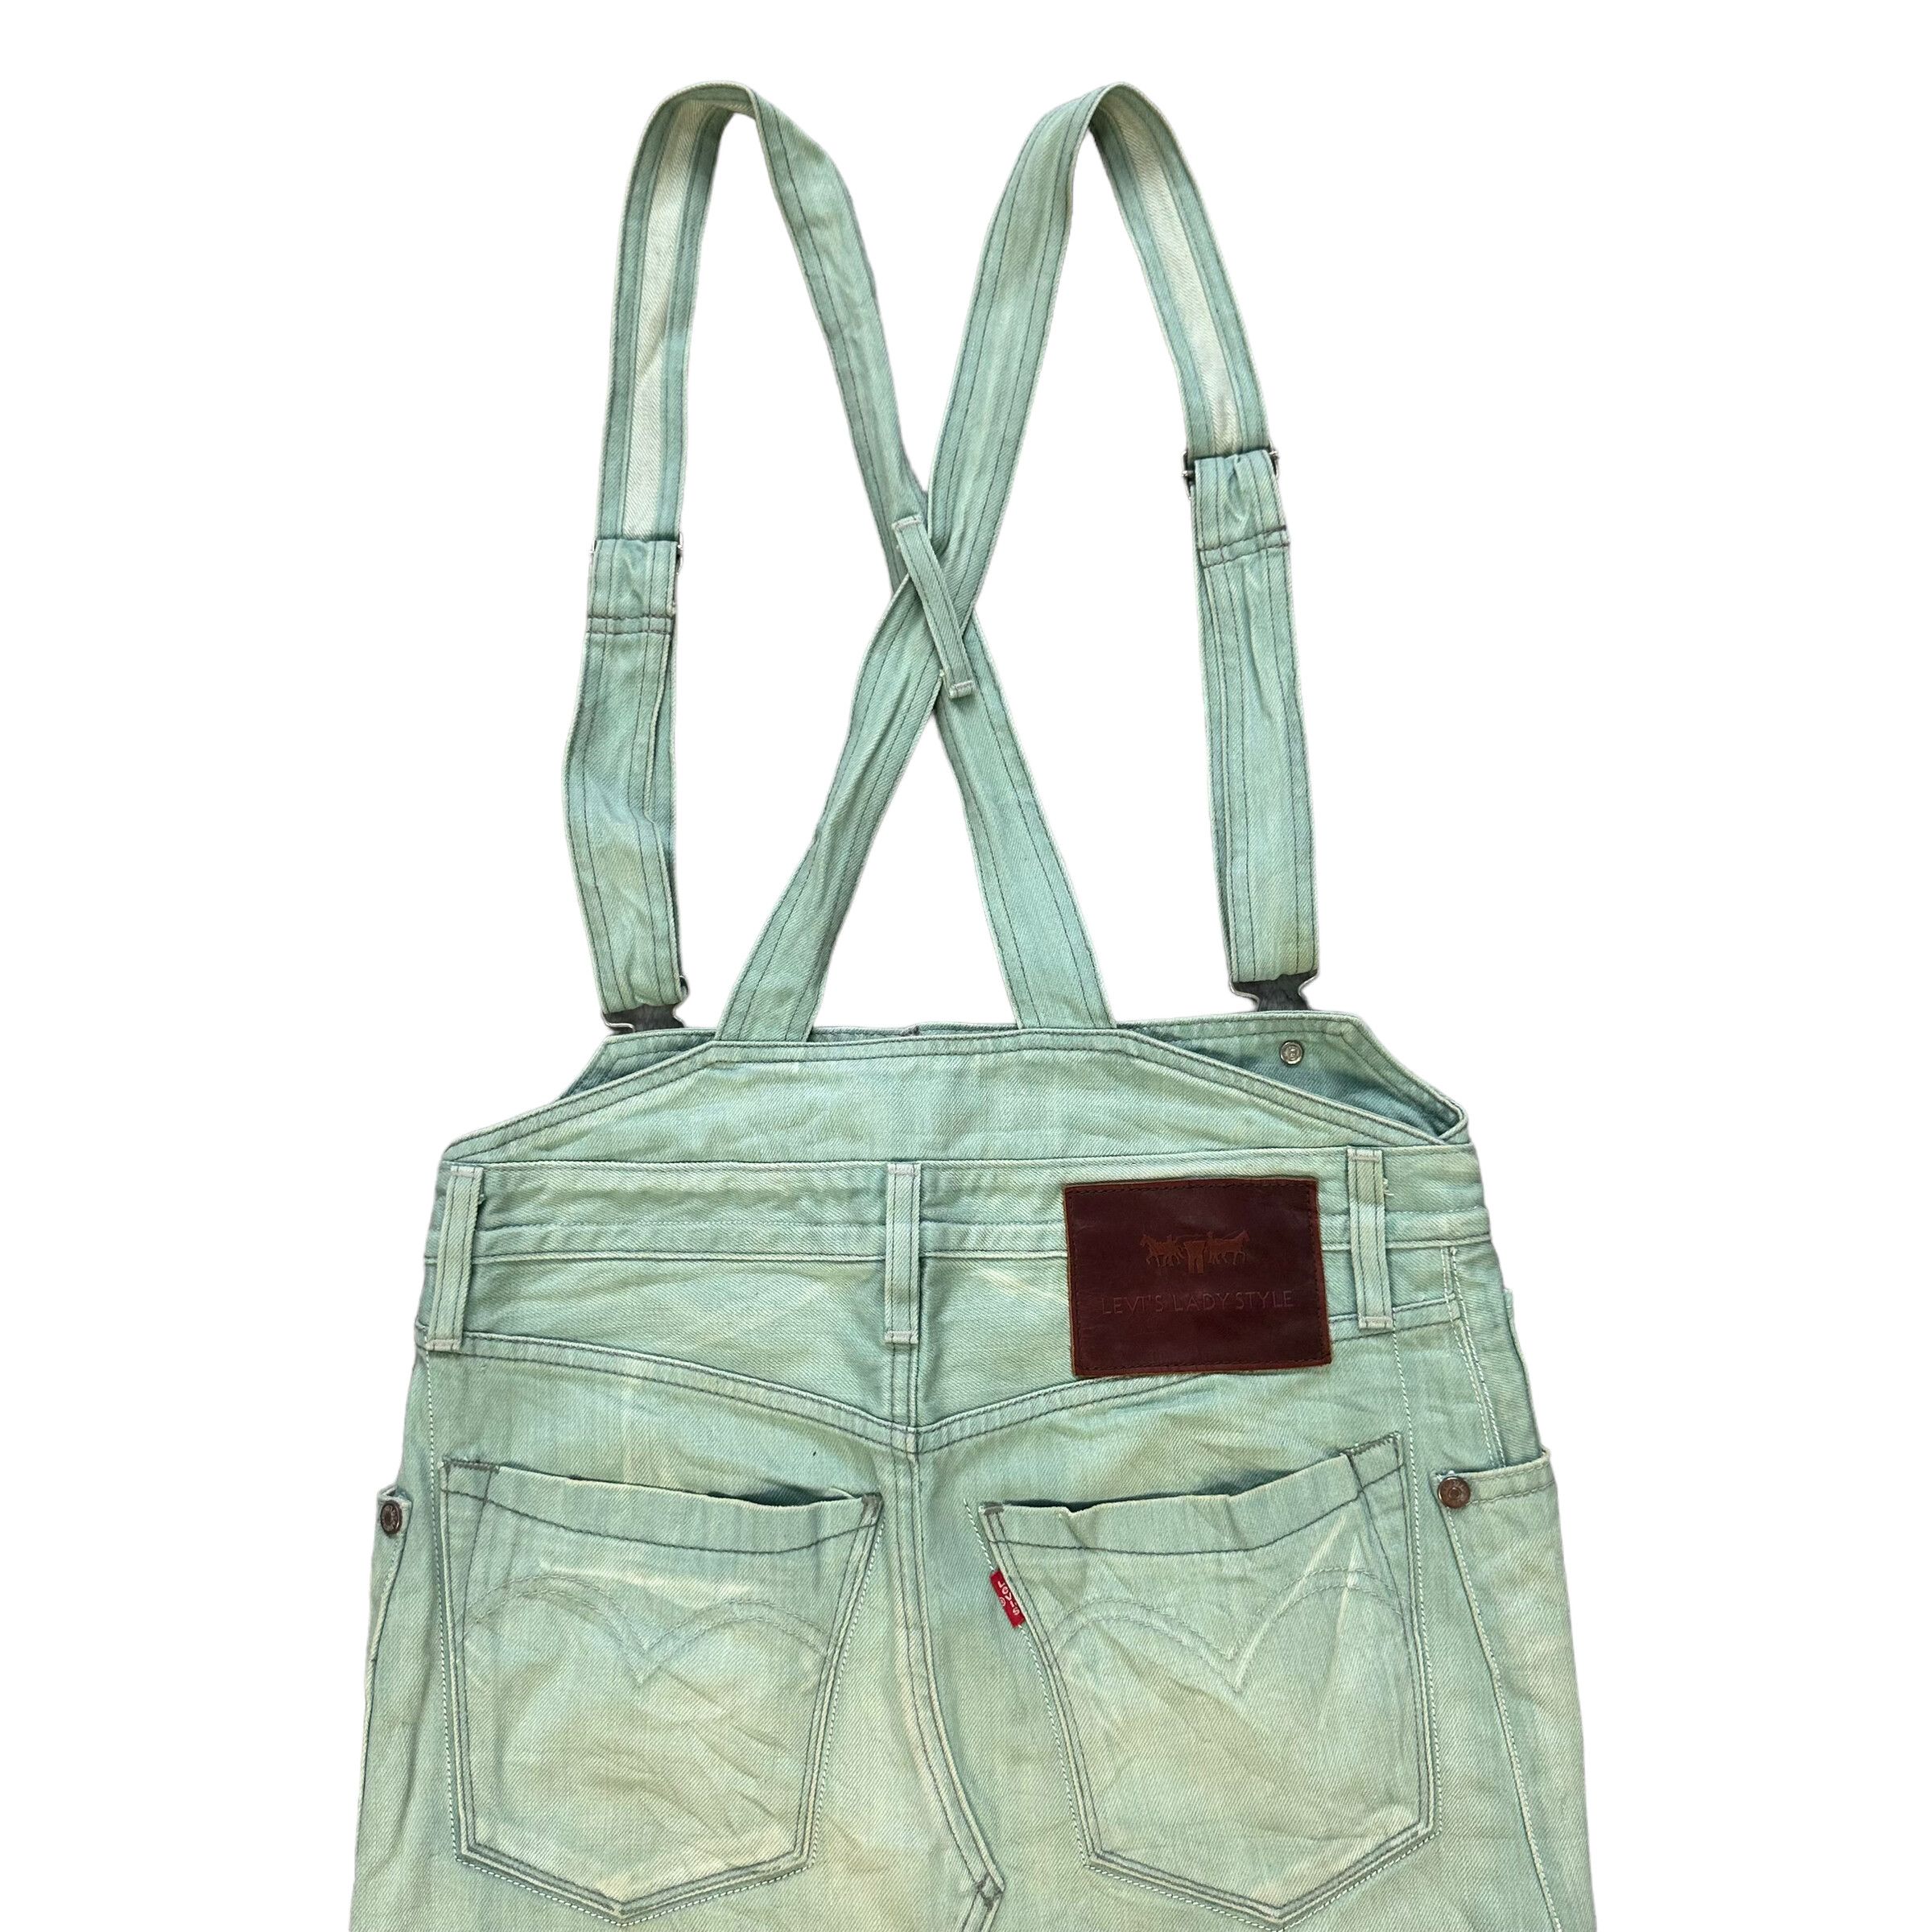 LEVIS LADY STYLE OVERALL MINI SKIRT IN GREEN DENIM #8659-019 - 12